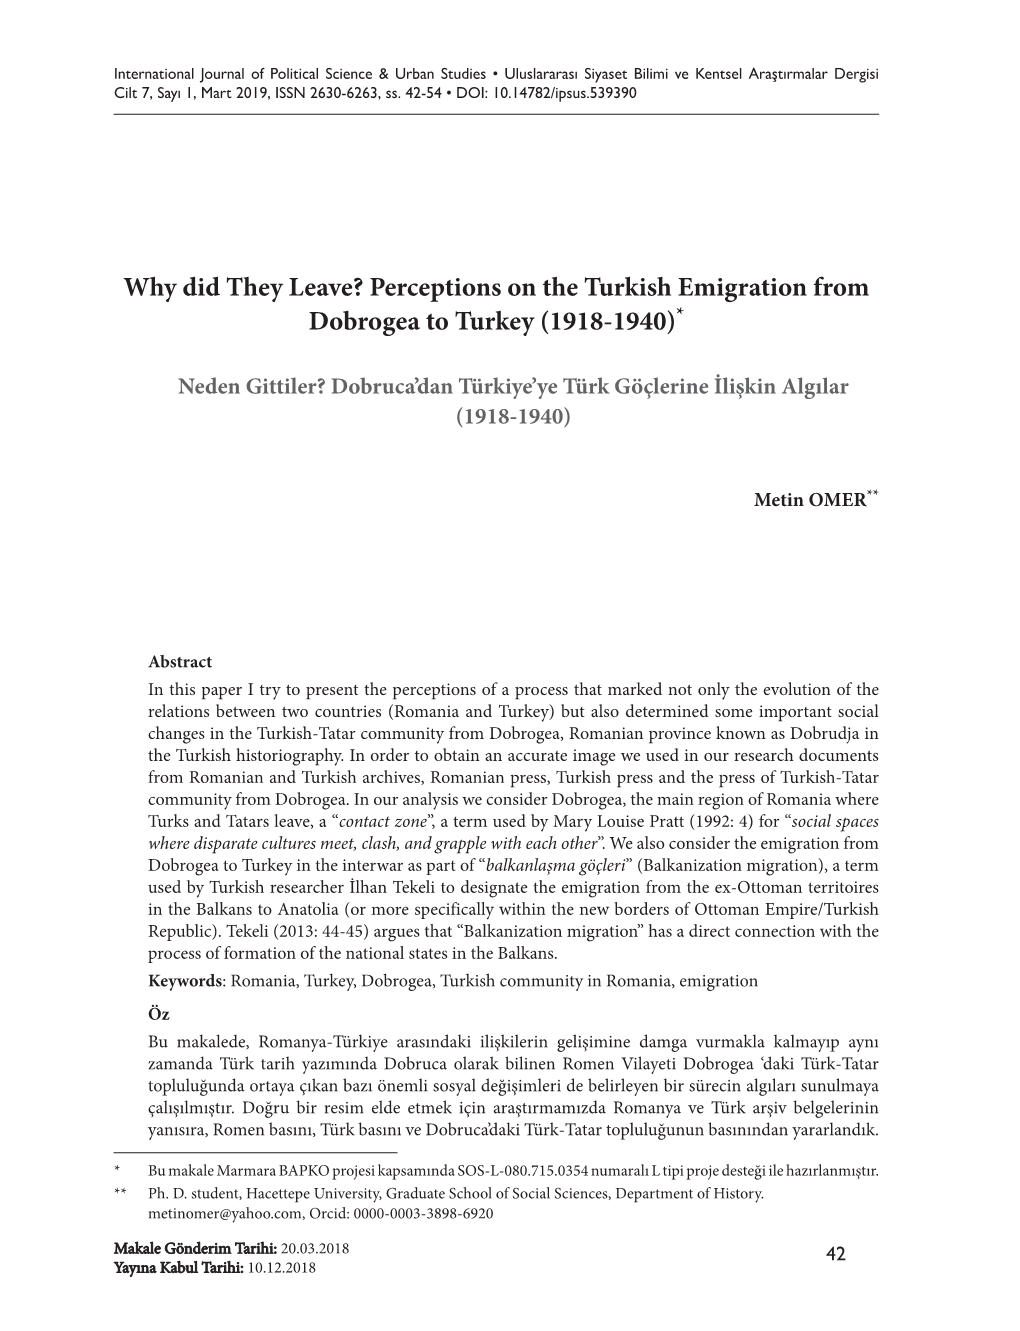 Perceptions on the Turkish Emigration from Dobrogea to Turkey (1918-1940)